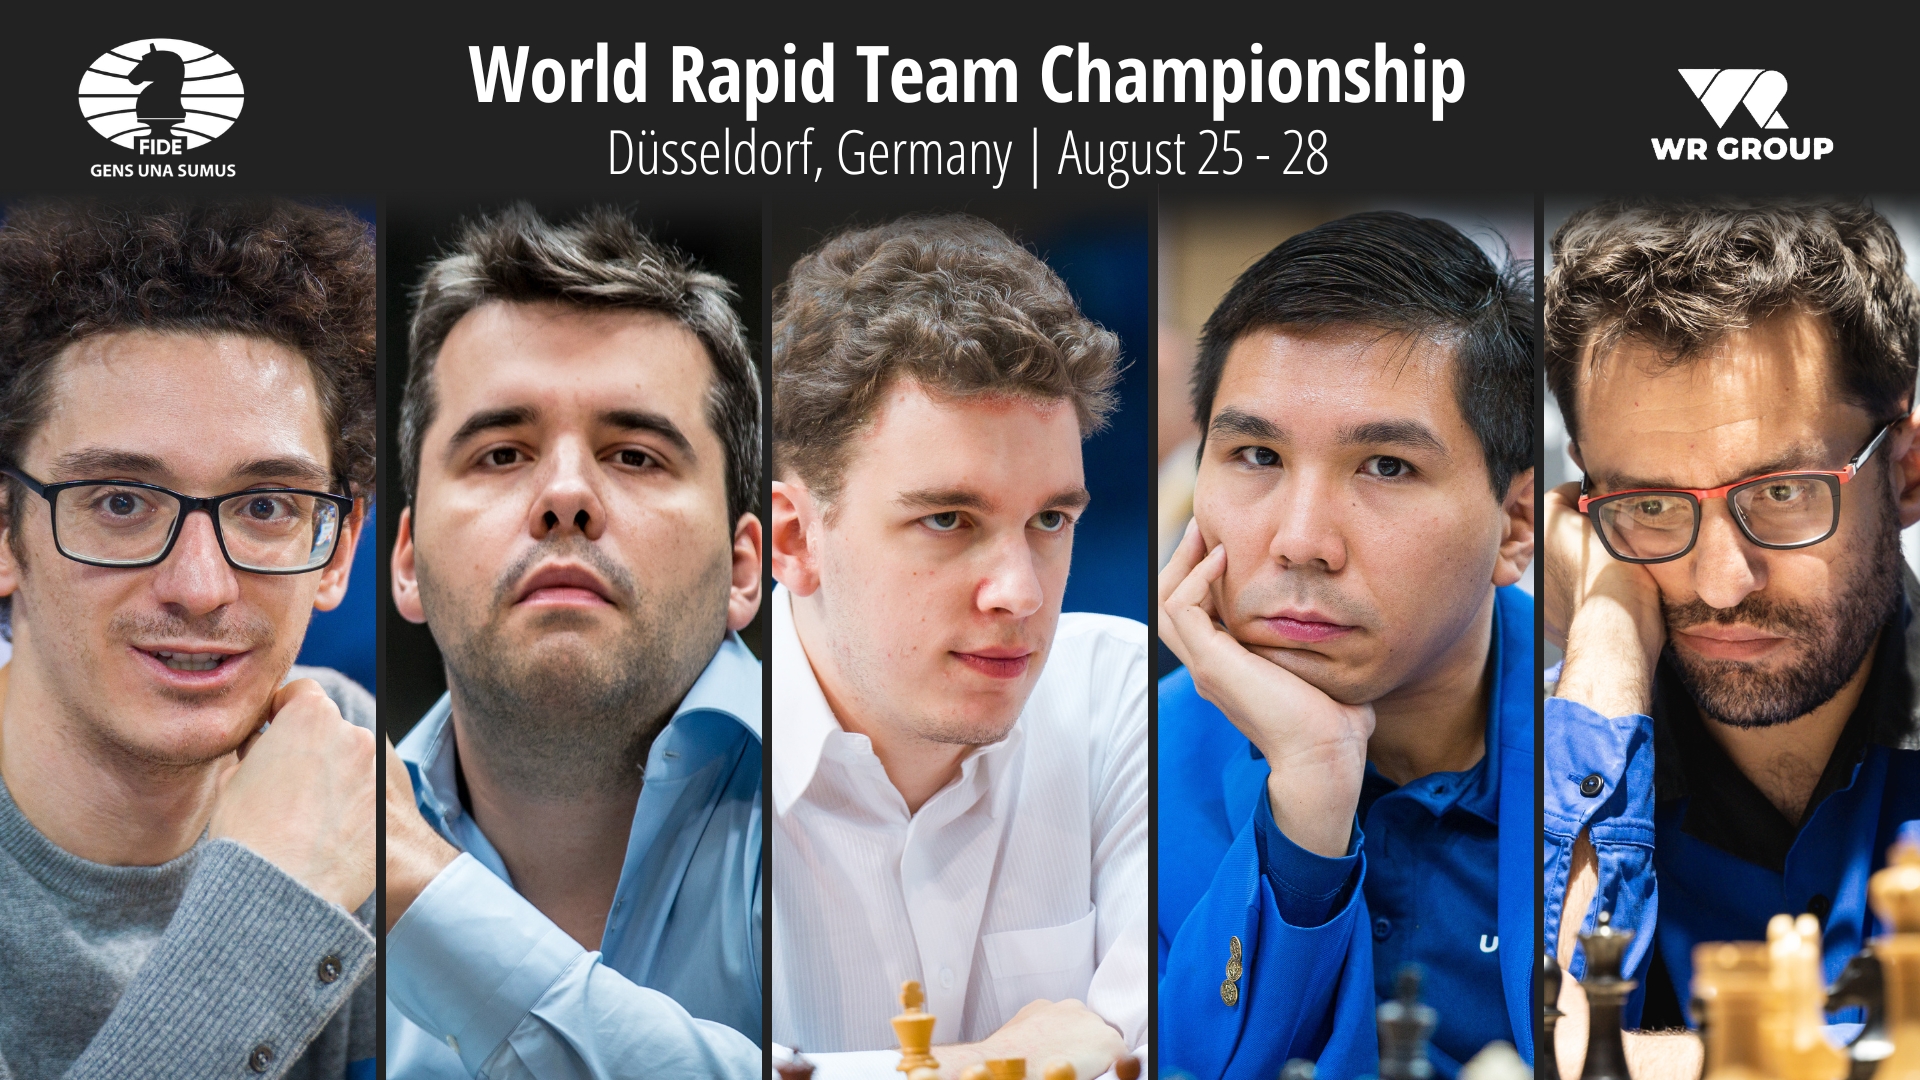 International Chess Federation on X: Nepomniachtchi's win over